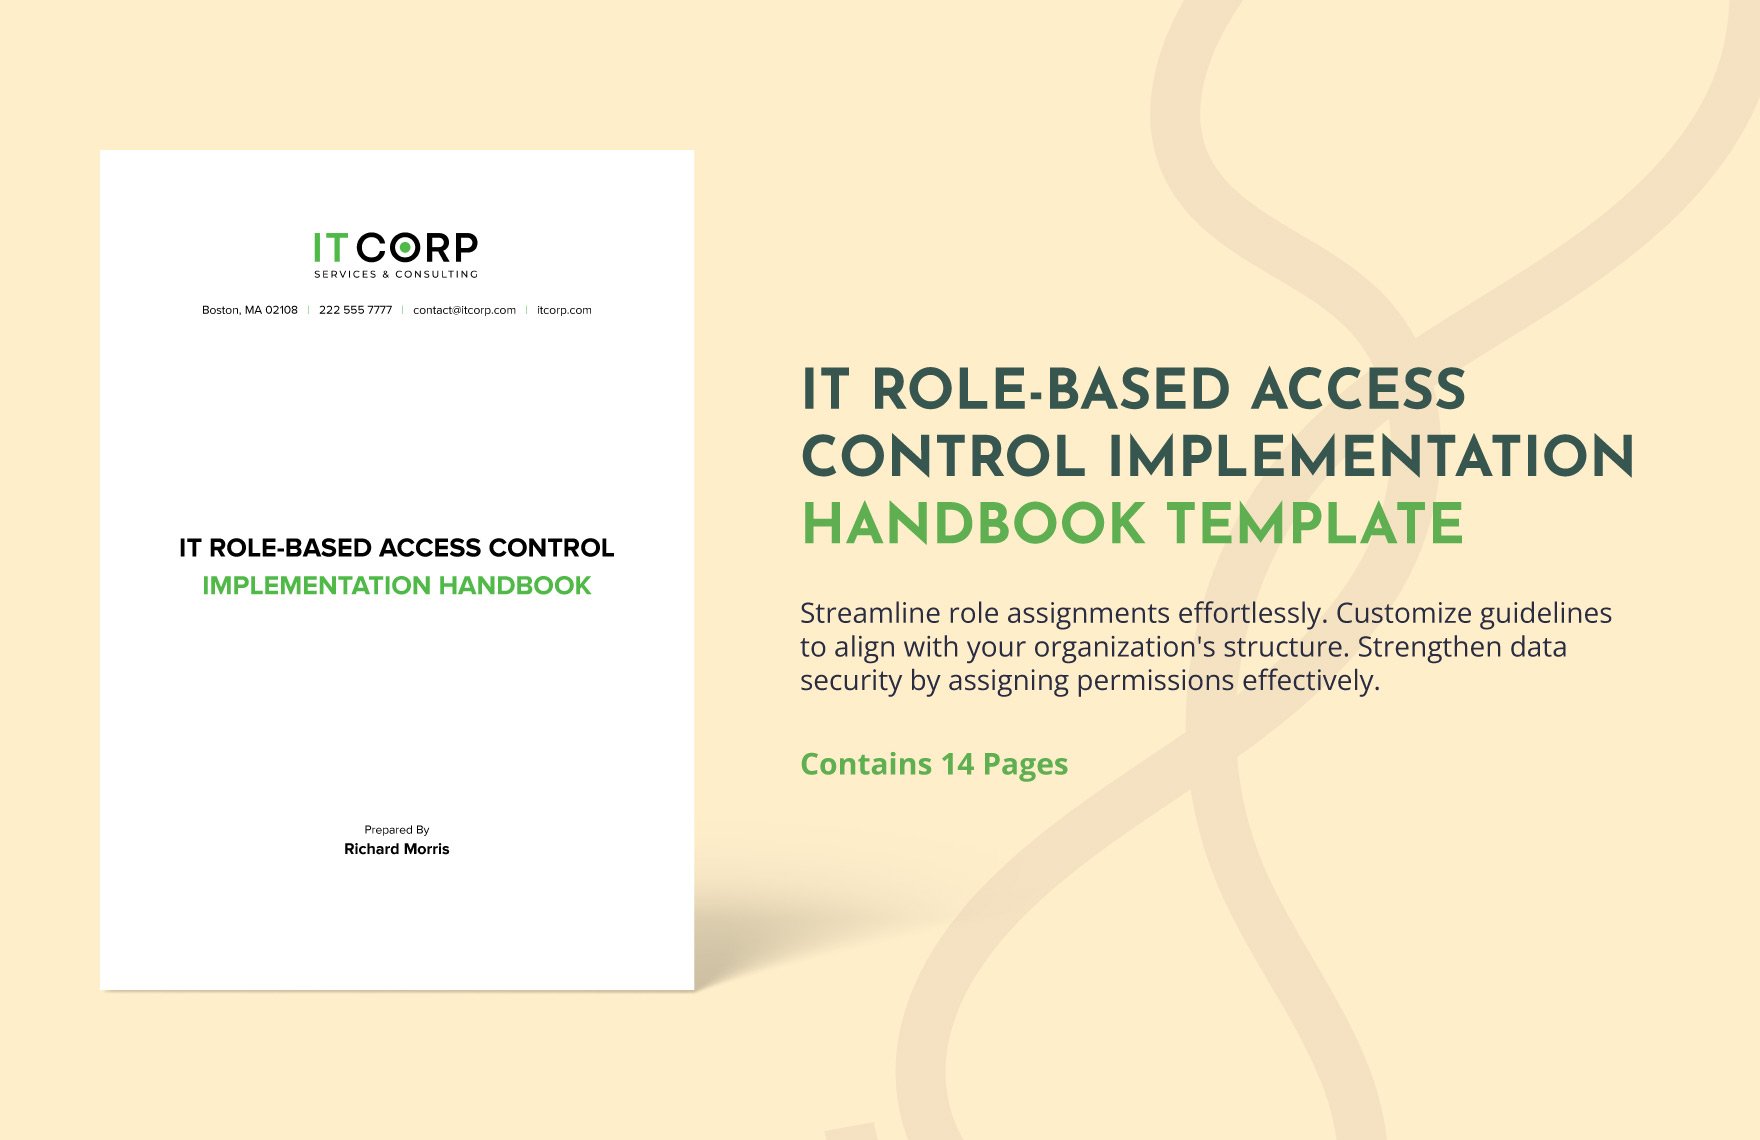 IT Role-Based Access Control Implementation Handbook Template